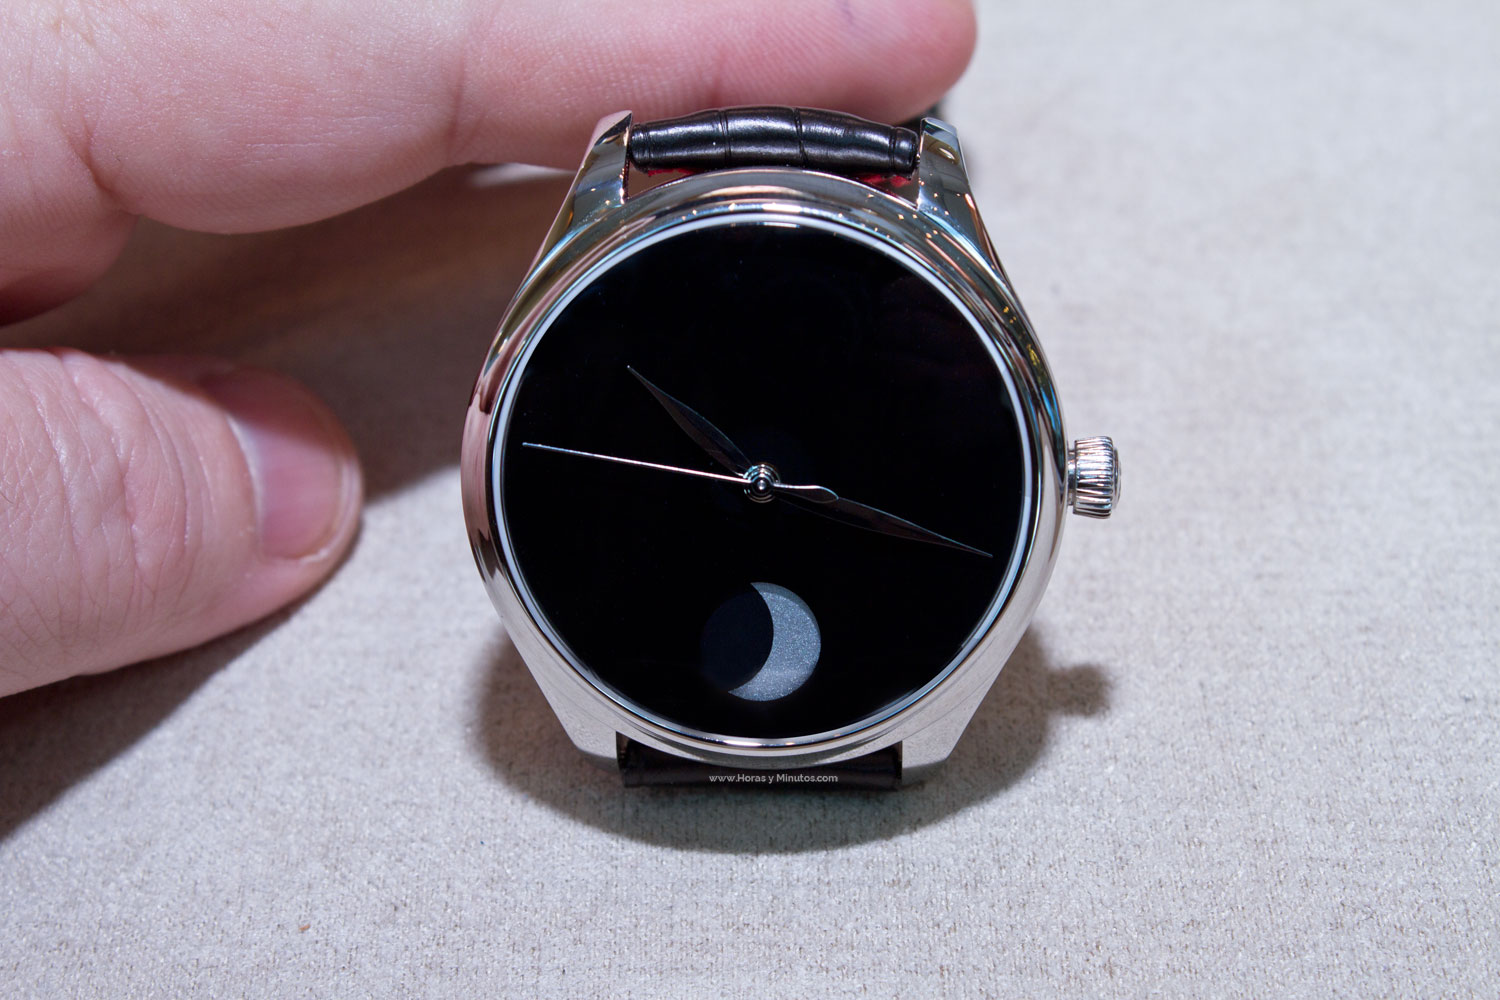 H. Moser & Cie Endeavour Perpetual Moon